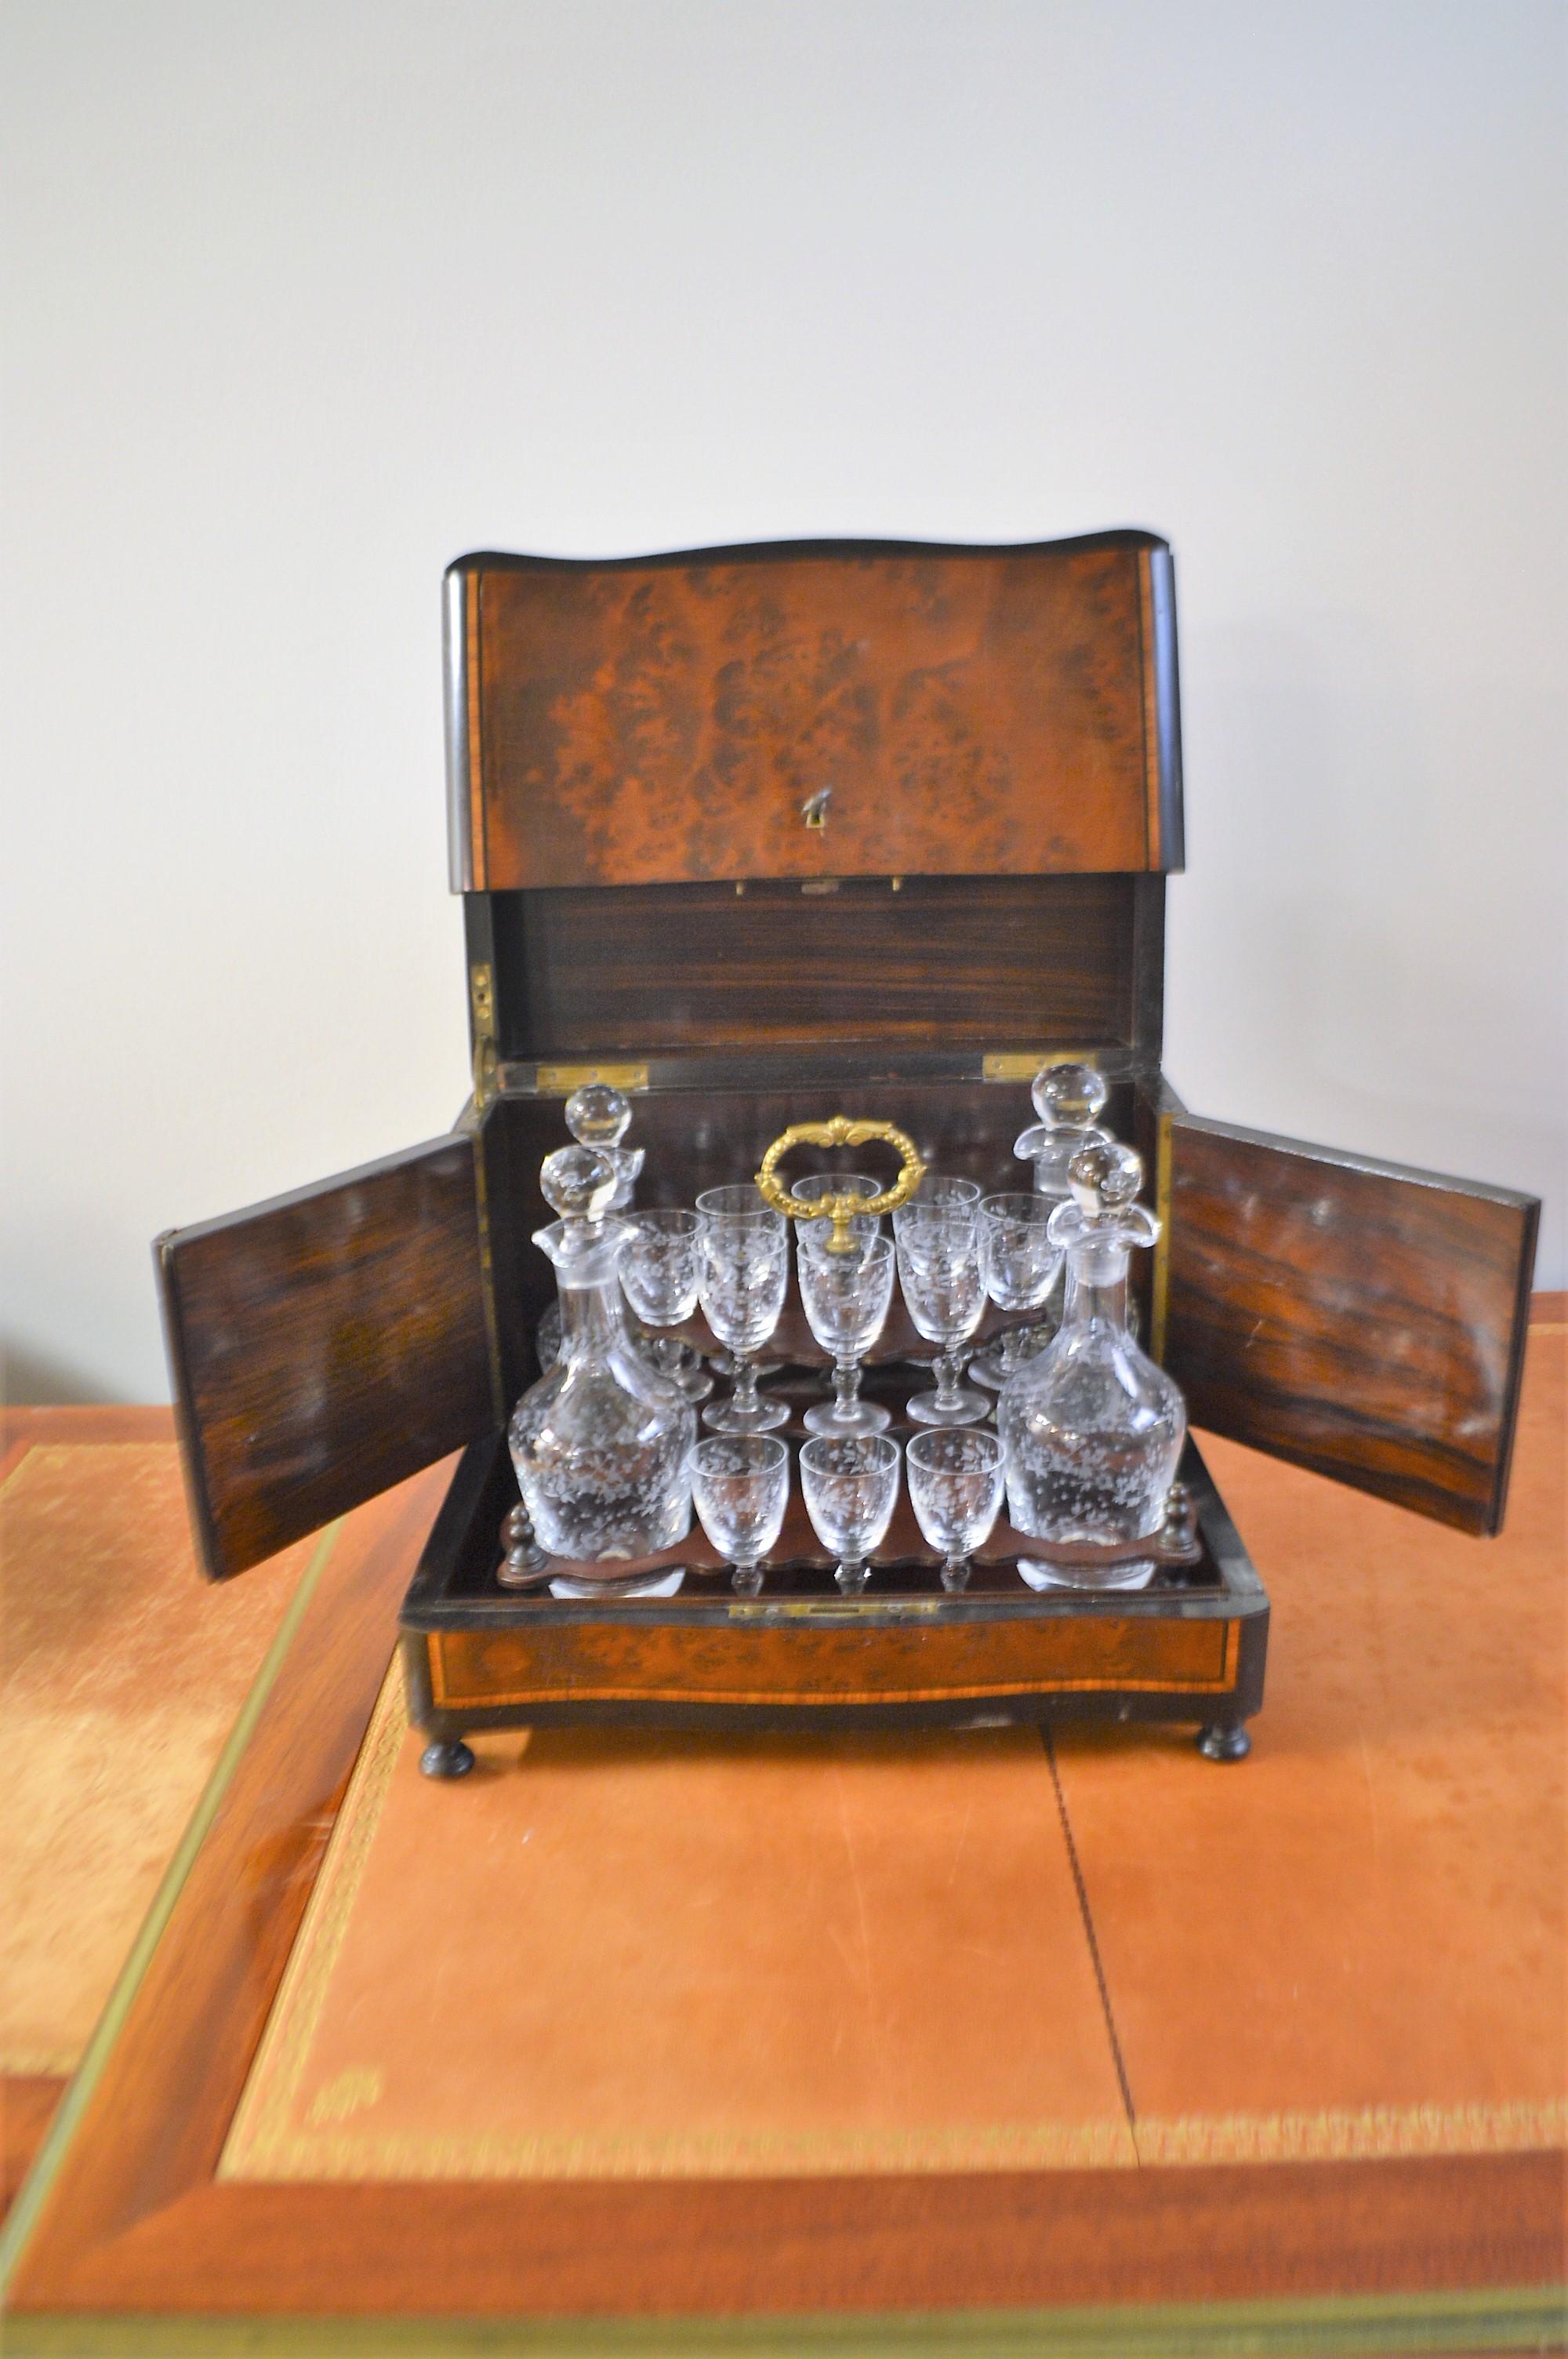 19th Century Portable Bar in a Burled Rosewood Box with Original Crystal Ware (Empire) im Angebot